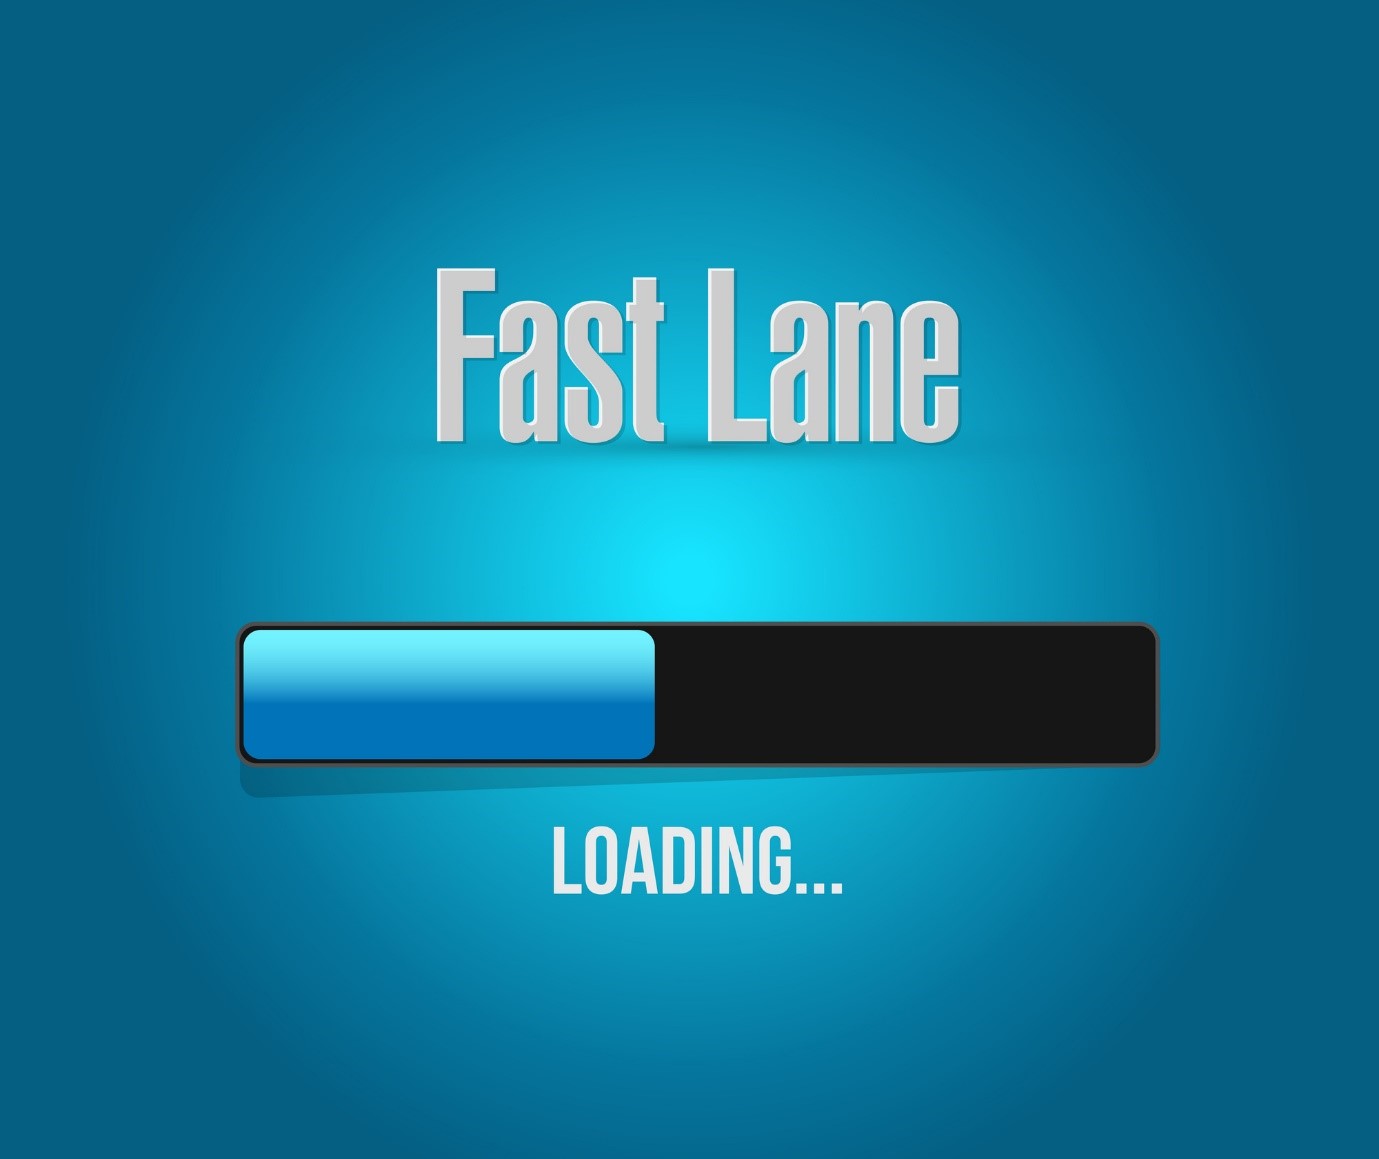 How to speed up a website and make it load faster